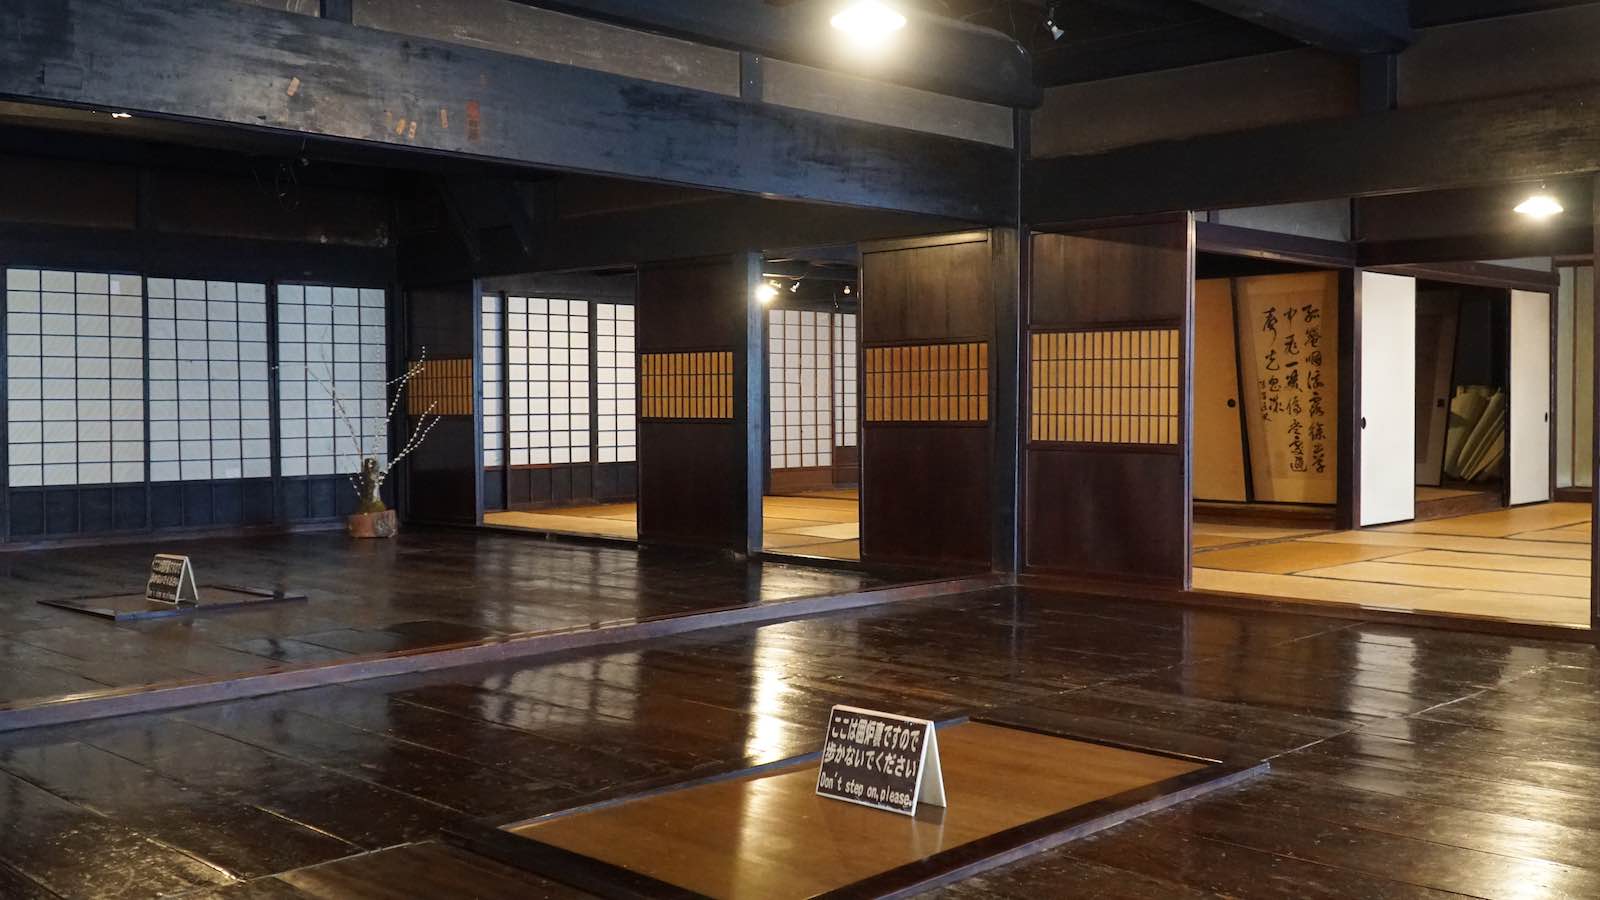 The hostel I stayed at, which was a very traditional Japanese home, was for whatever reason blasting American country music (the kind where they're singing about their trucks and not the Taylor Swift kind) in the living room. I didn't take a photo of place, but it looked like this.